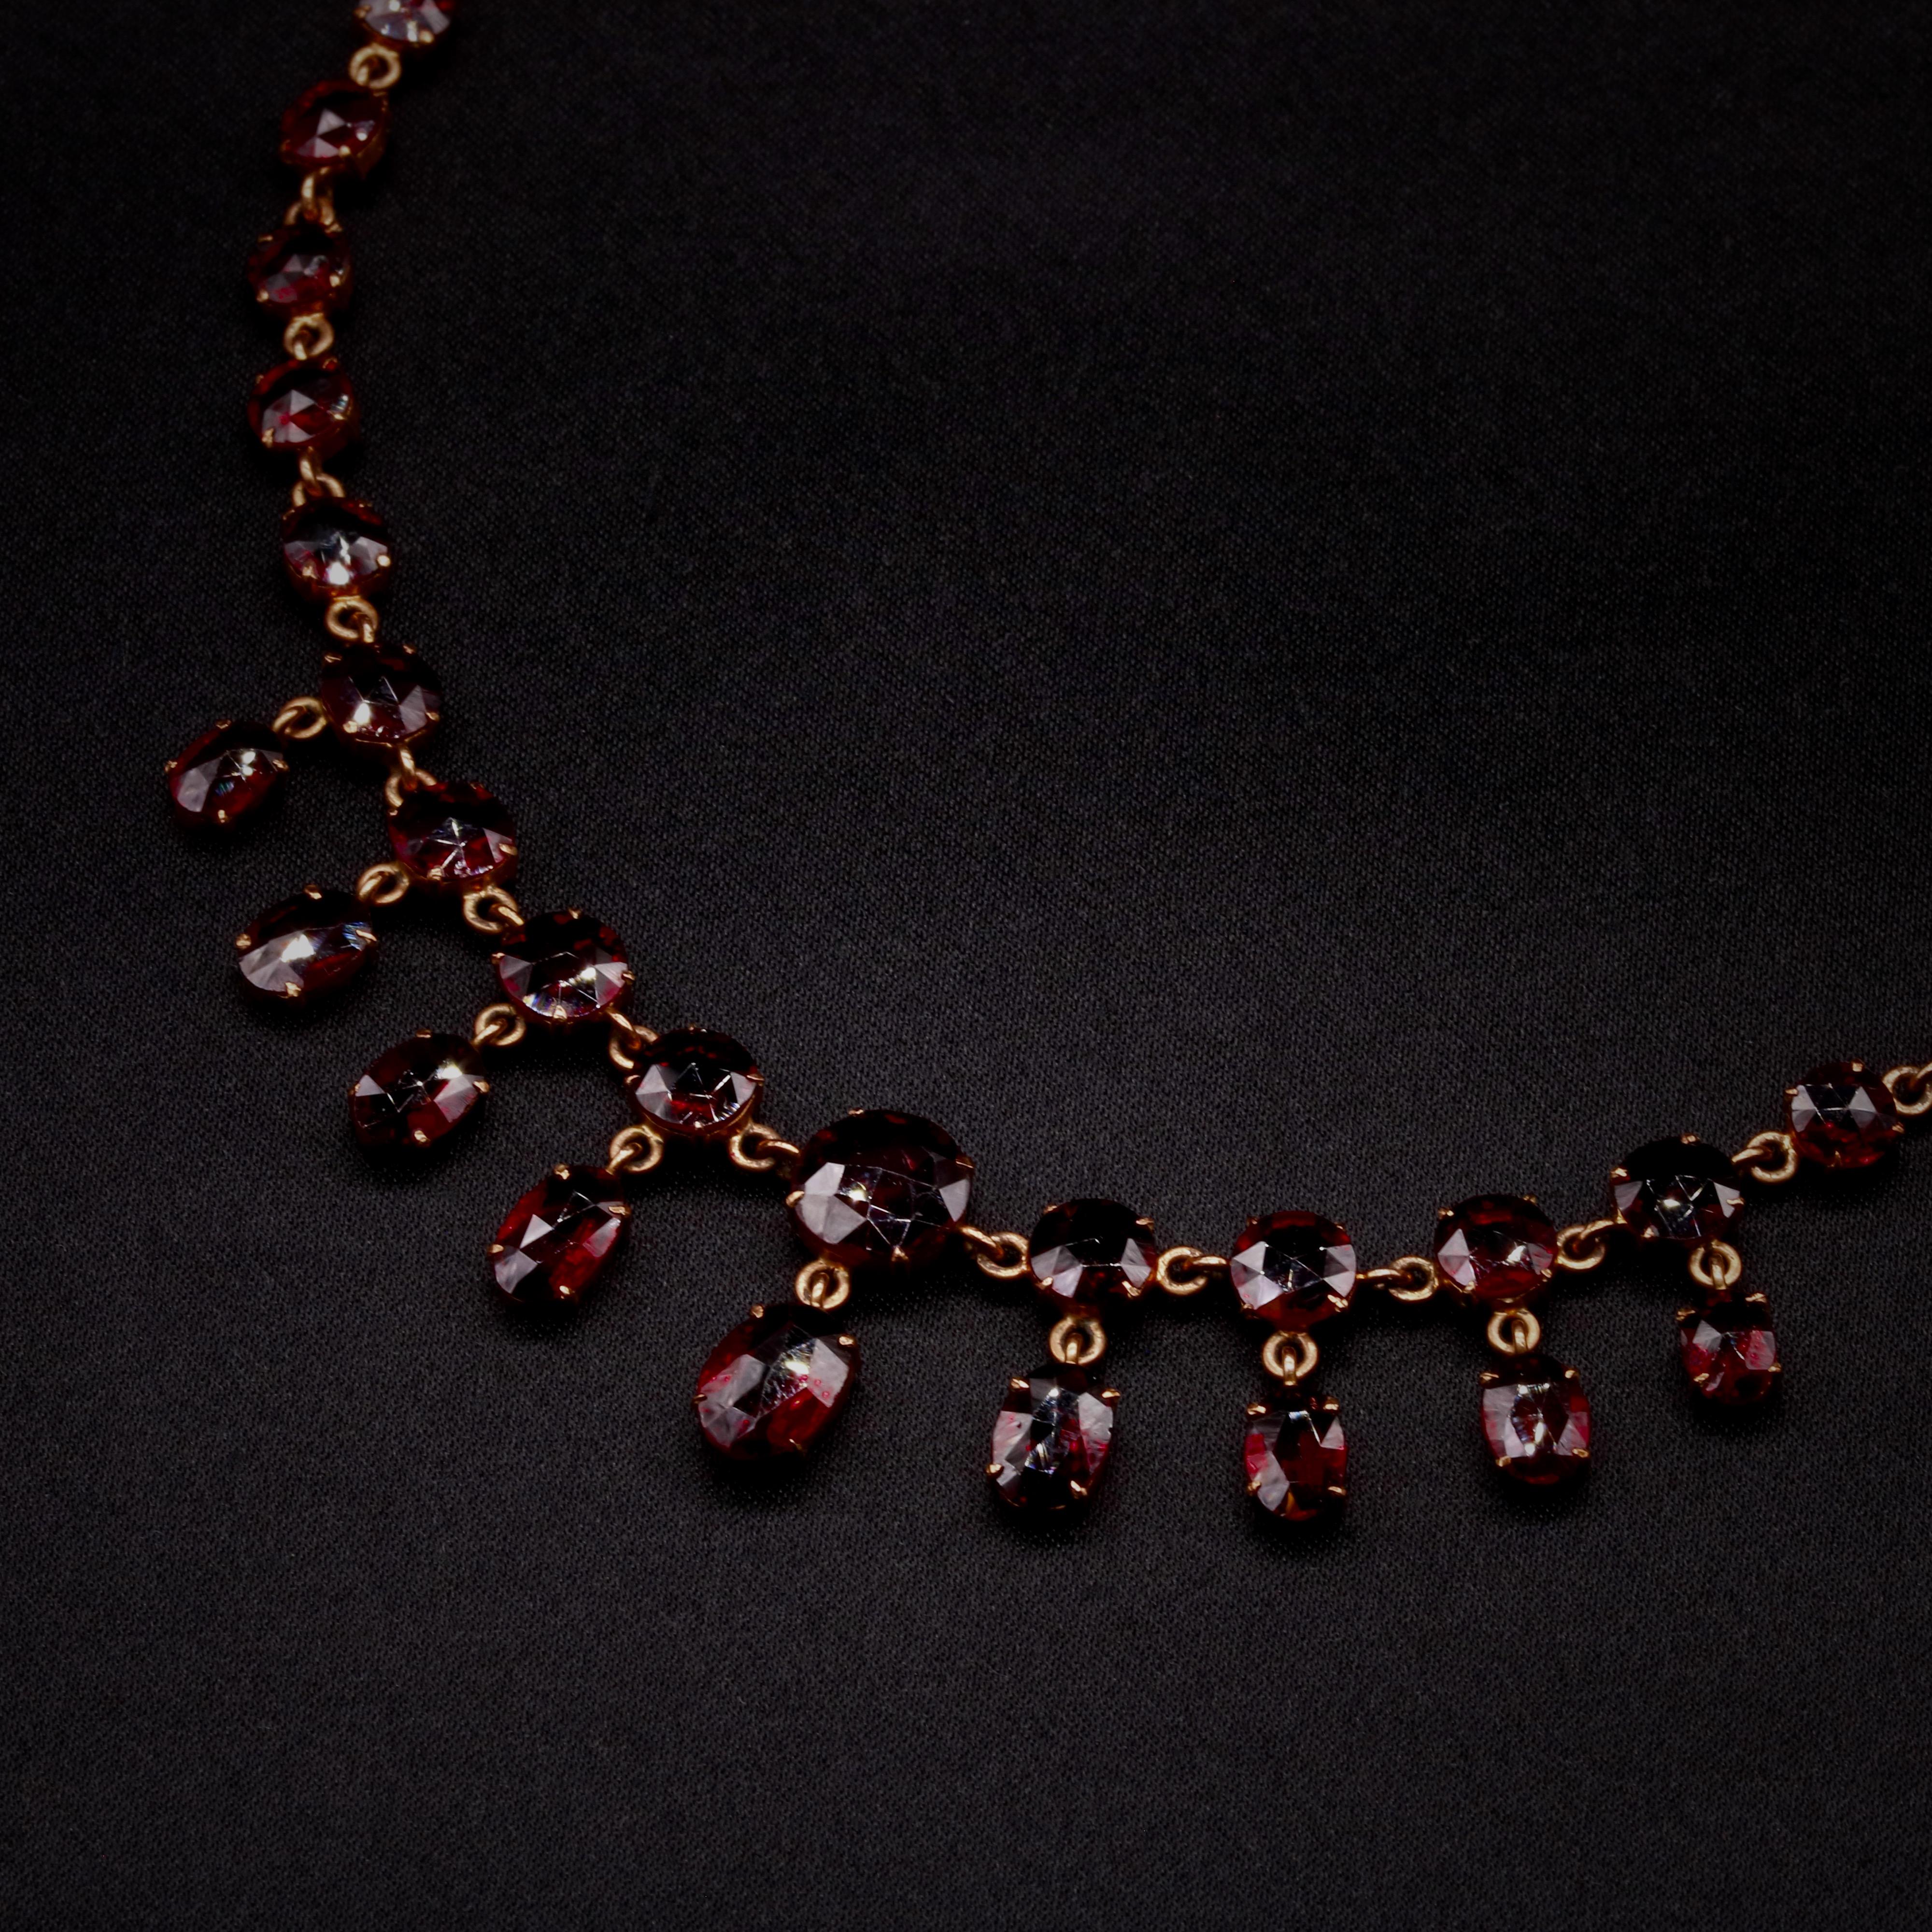 Antique Victorian 1870s Gold 48ctw Garnet Fringe Necklace in Original Fitted Box For Sale 2